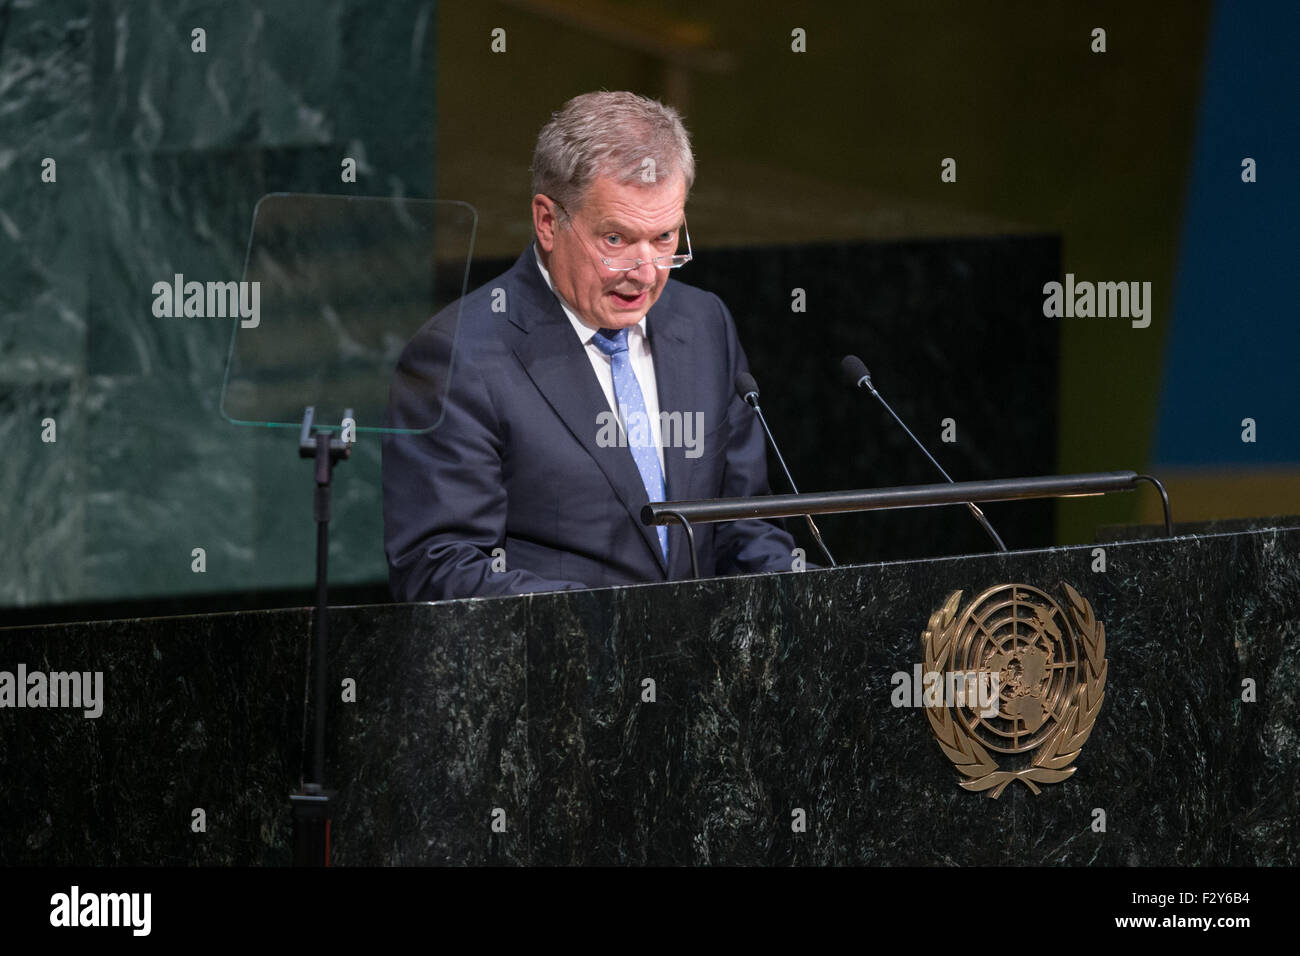 New York, USA. 25th Sep, 2015. Finnish President Sauli Niinisto addresses the Sustainable Development Summit at United Nations headquarters in New York, Sept. 25, 2015. A momentous sustainable development agenda, which charts a new era of sustainable development until 2030, was adopted on Friday by 193 UN member states at the UN Sustainable Development Summit at the UN headquarters in New York. © Li Muzi/Xinhua/Alamy Live News Stock Photo